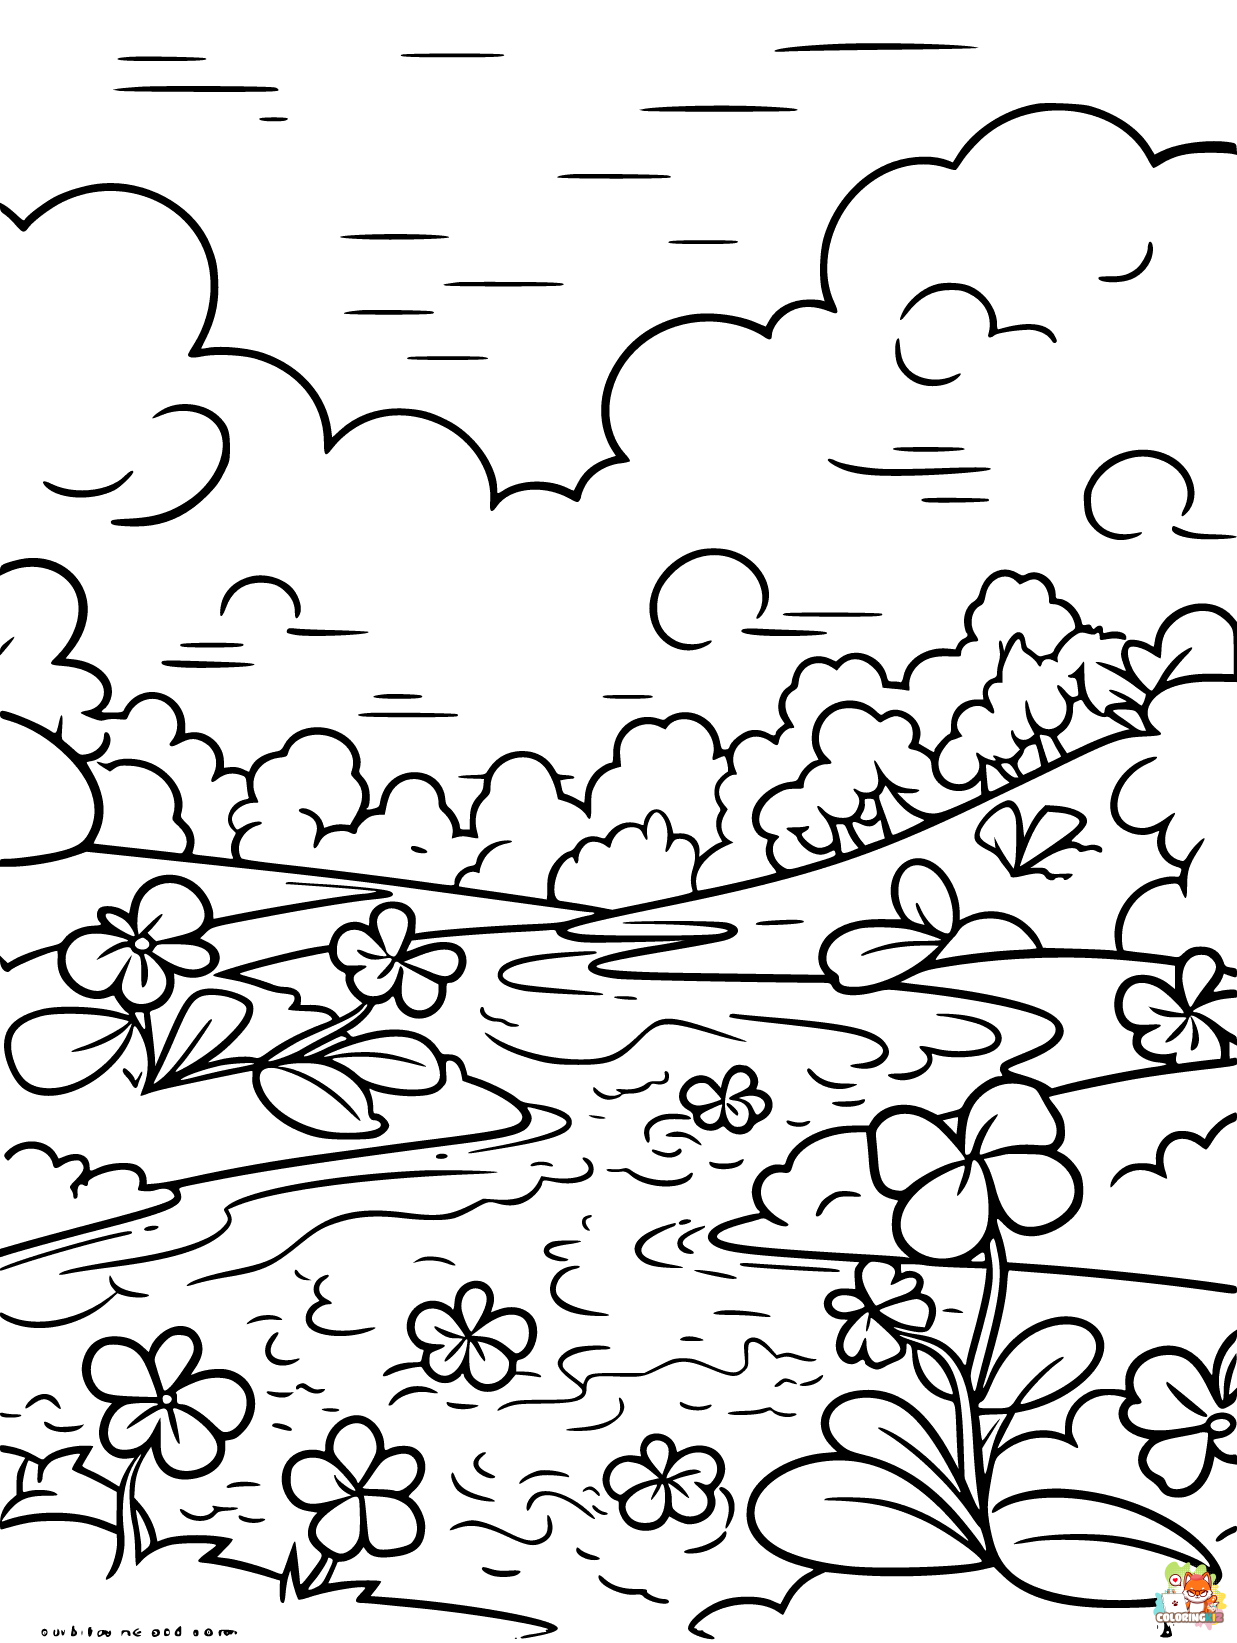 clover coloring pages to print